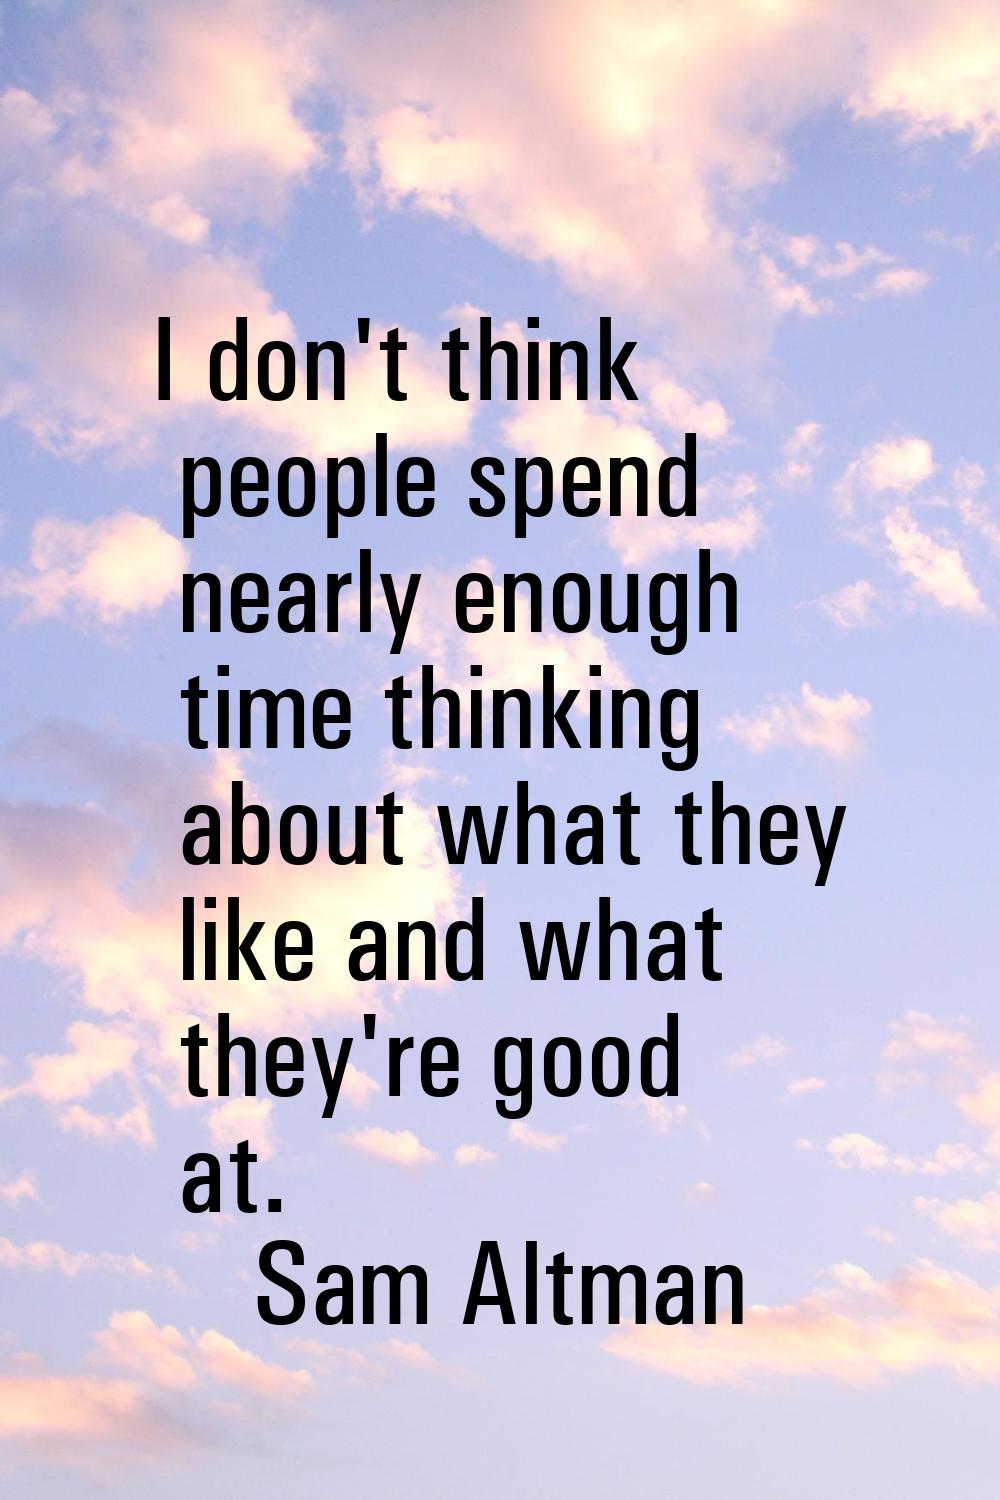 I don't think people spend nearly enough time thinking about what they like and what they're good a